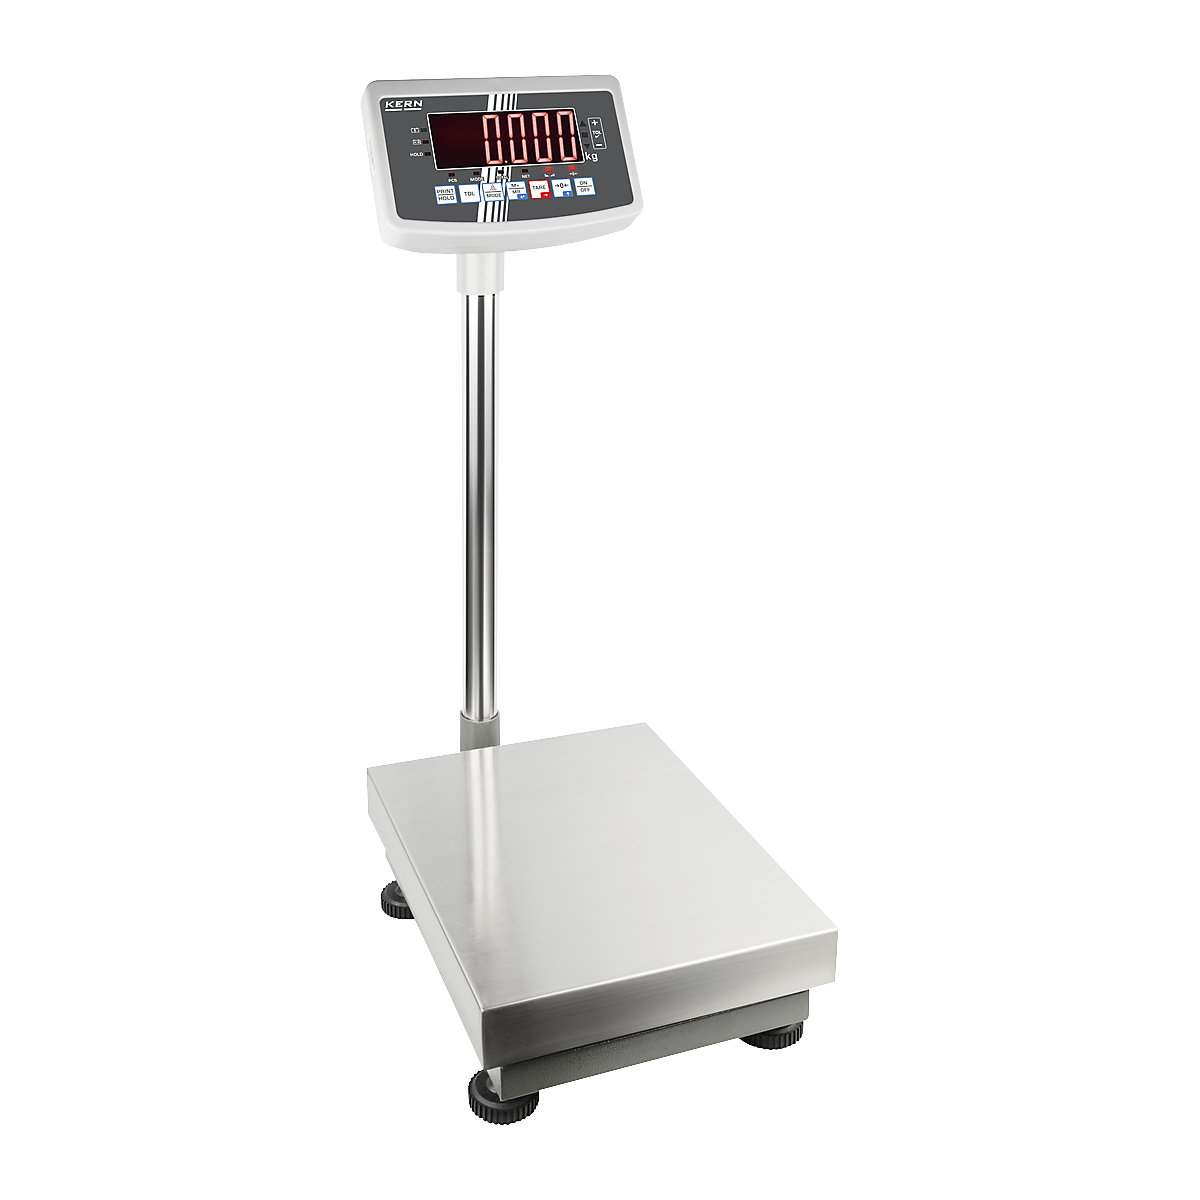 Platform scales – KERN, incl. tripod, weighing range up to 300 kg, read-out accuracy 20 g-2